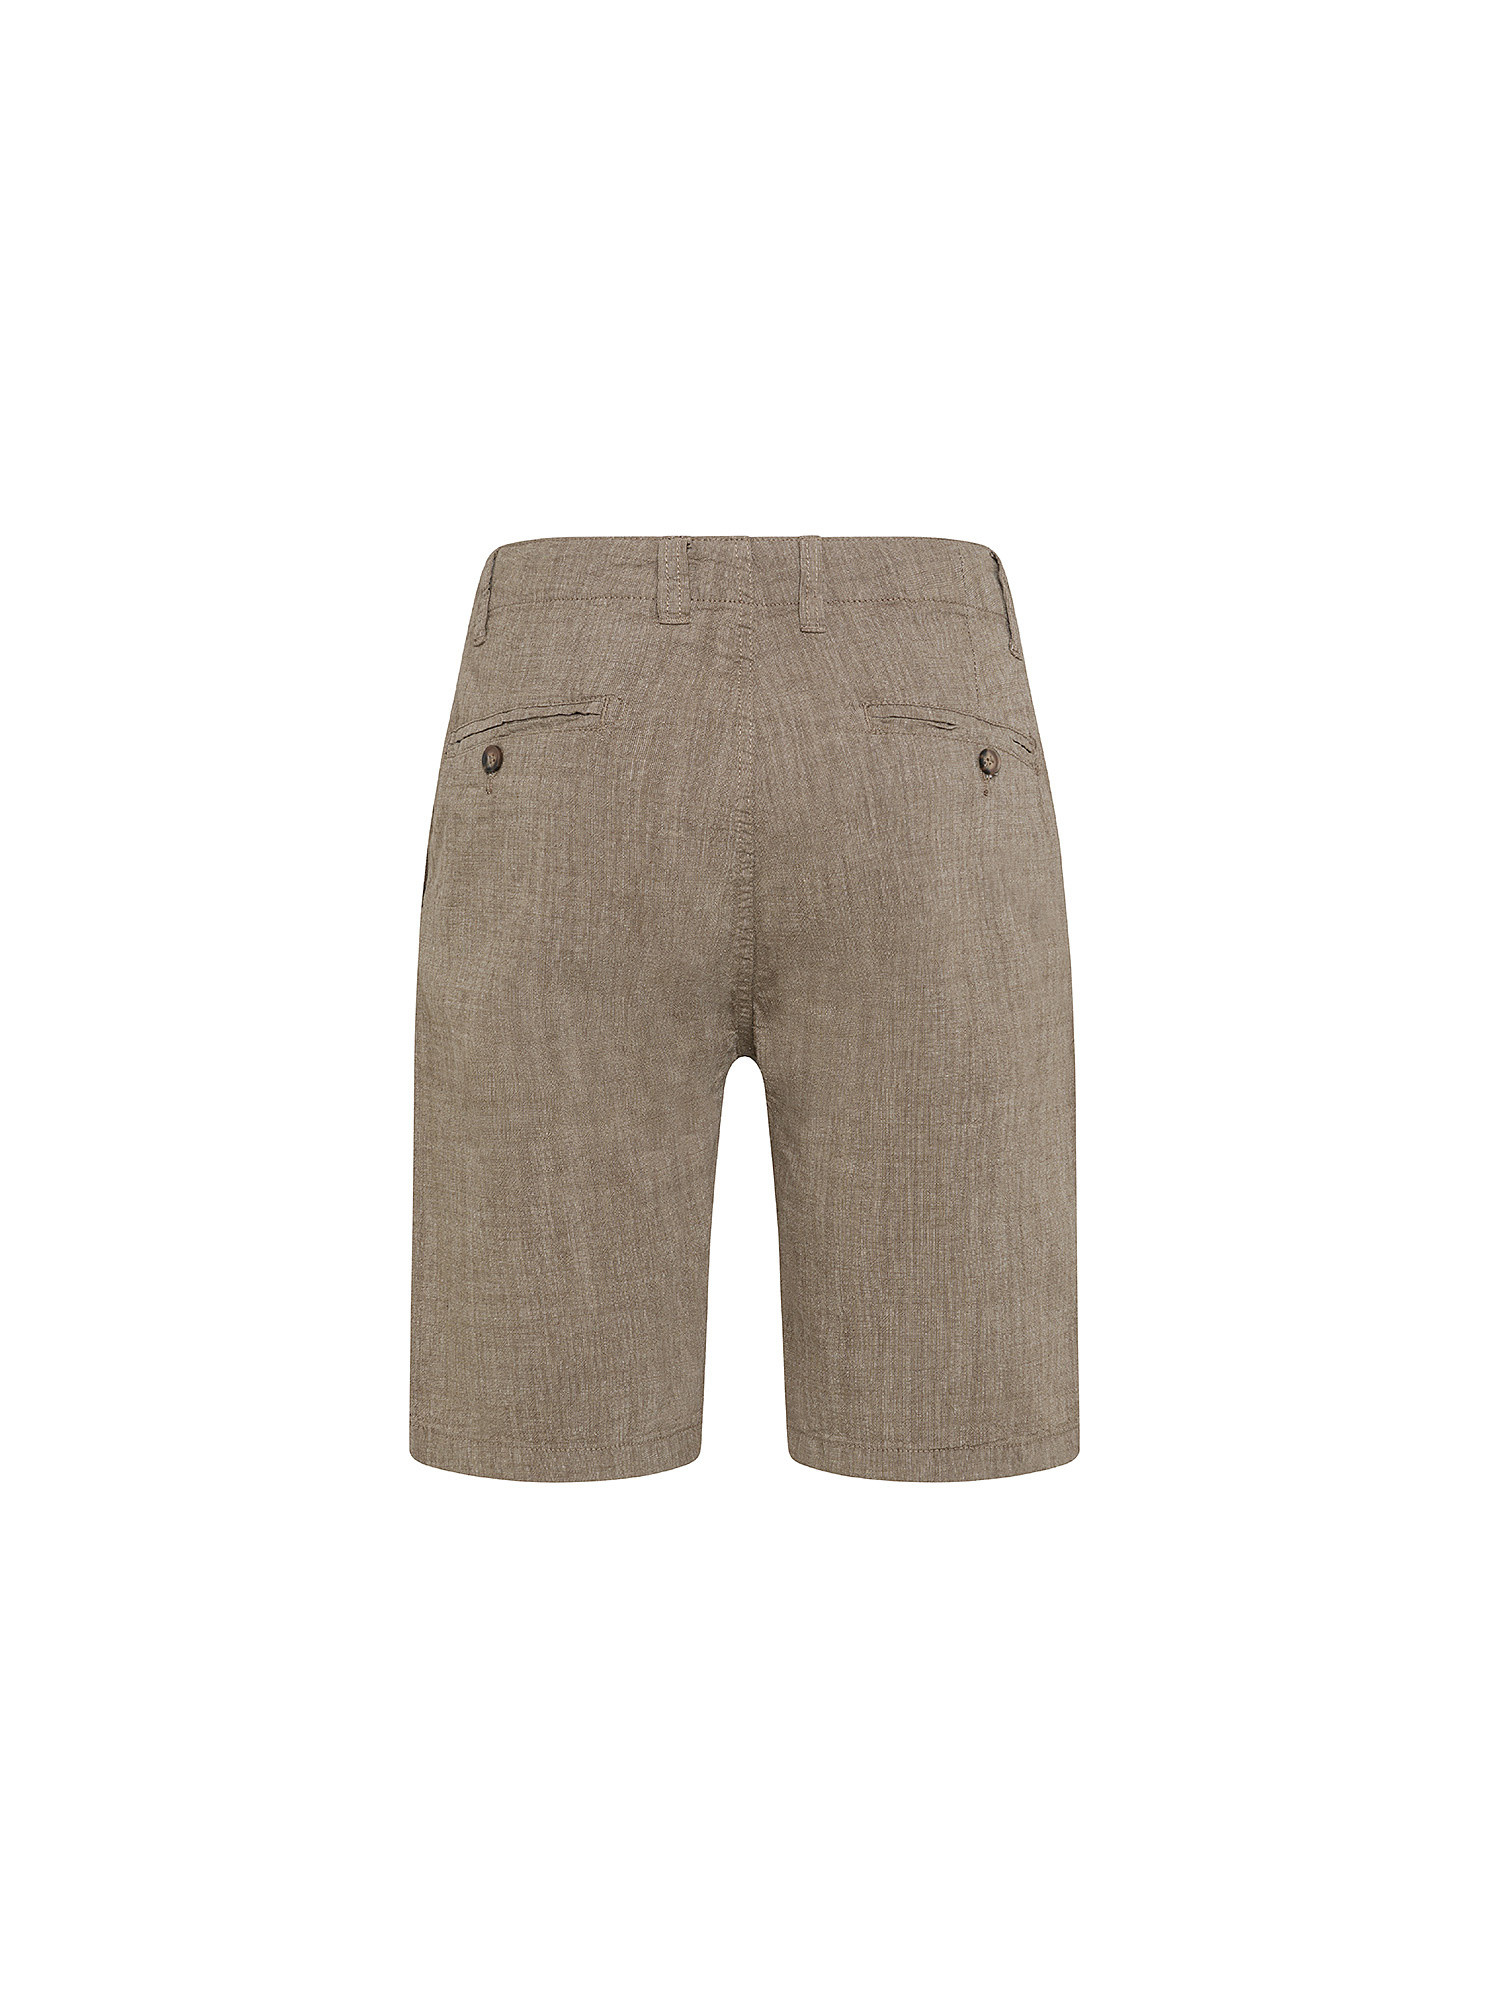 JCT - Chino bermuda in pure cotton, Brown, large image number 1